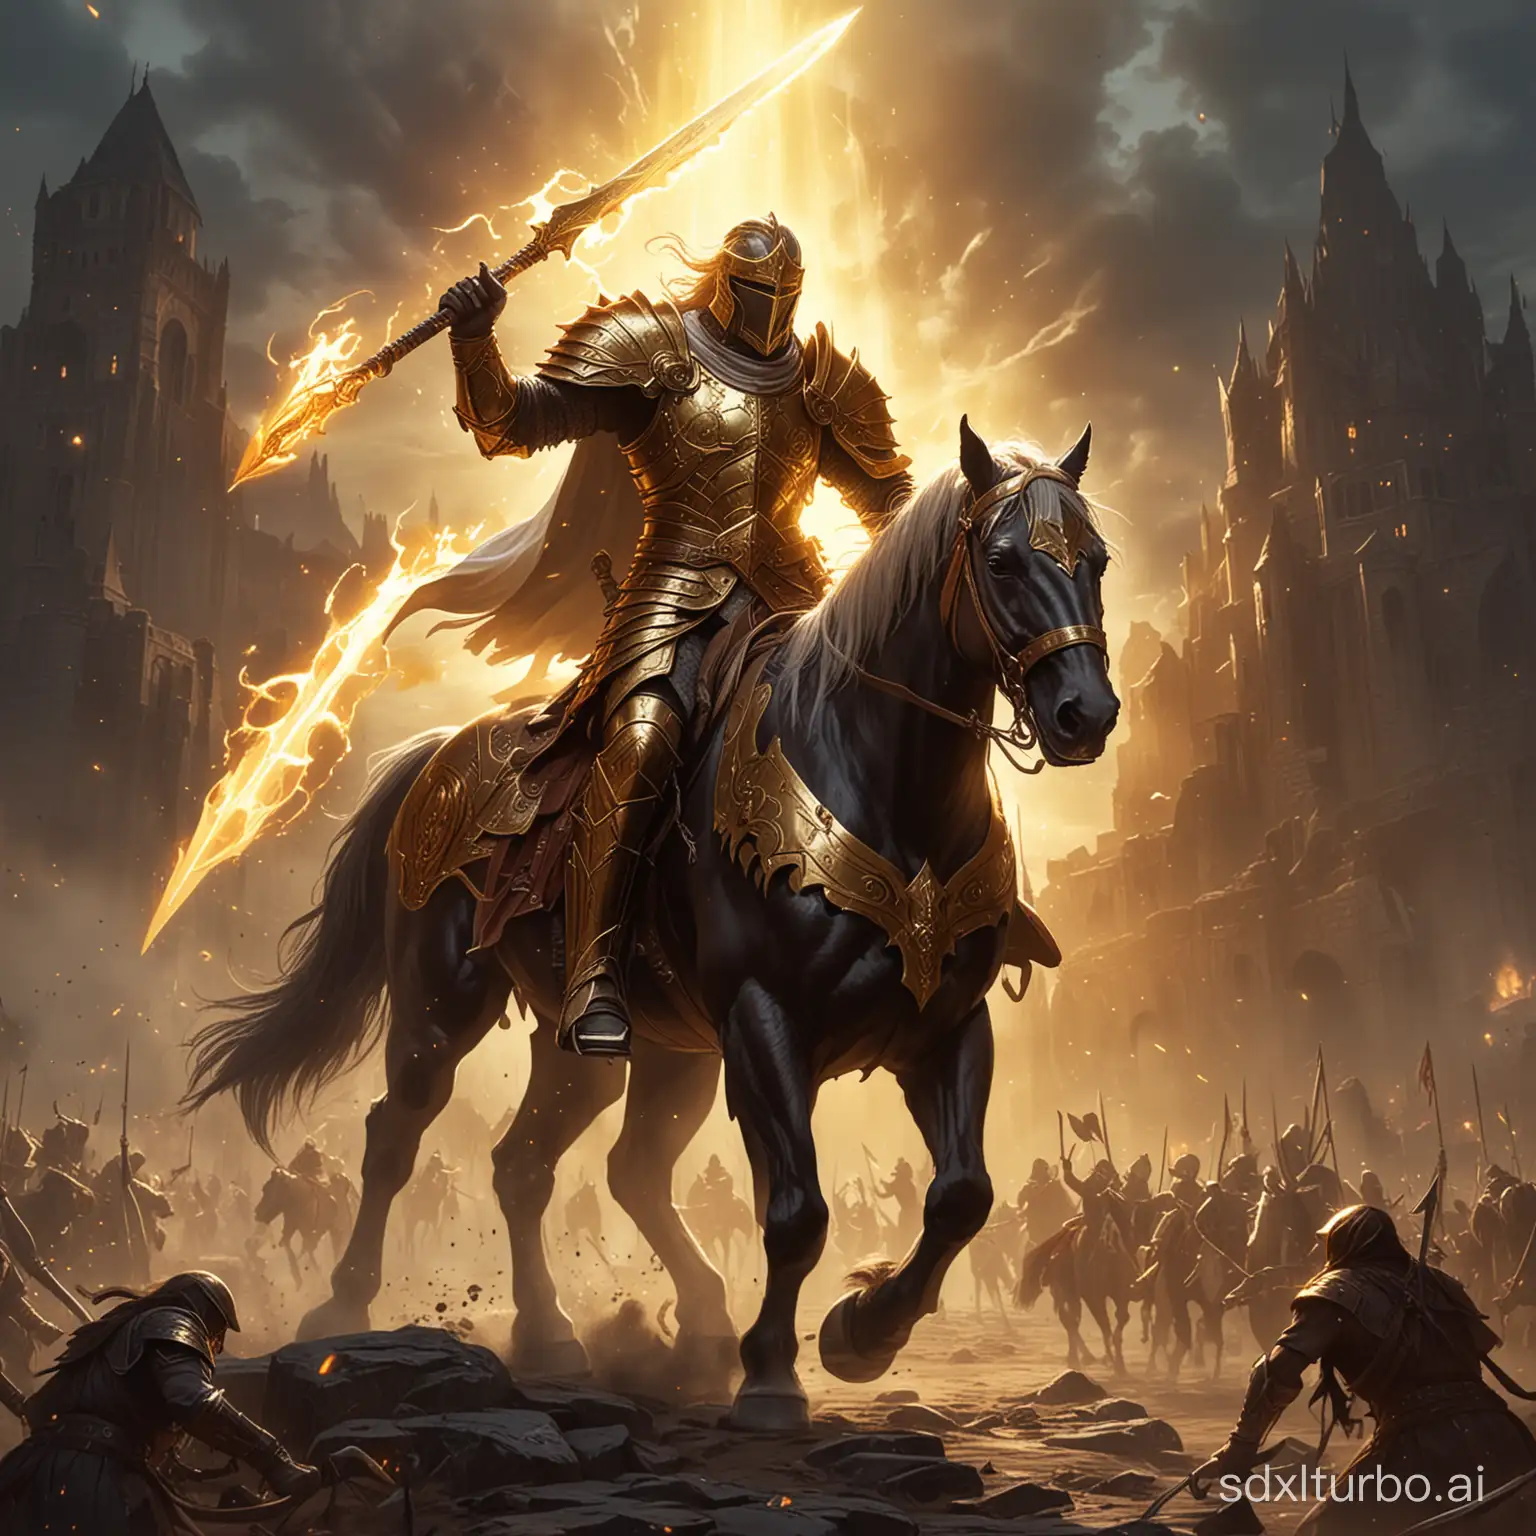 The paladin with shiny golden light rides a horse to chop demon